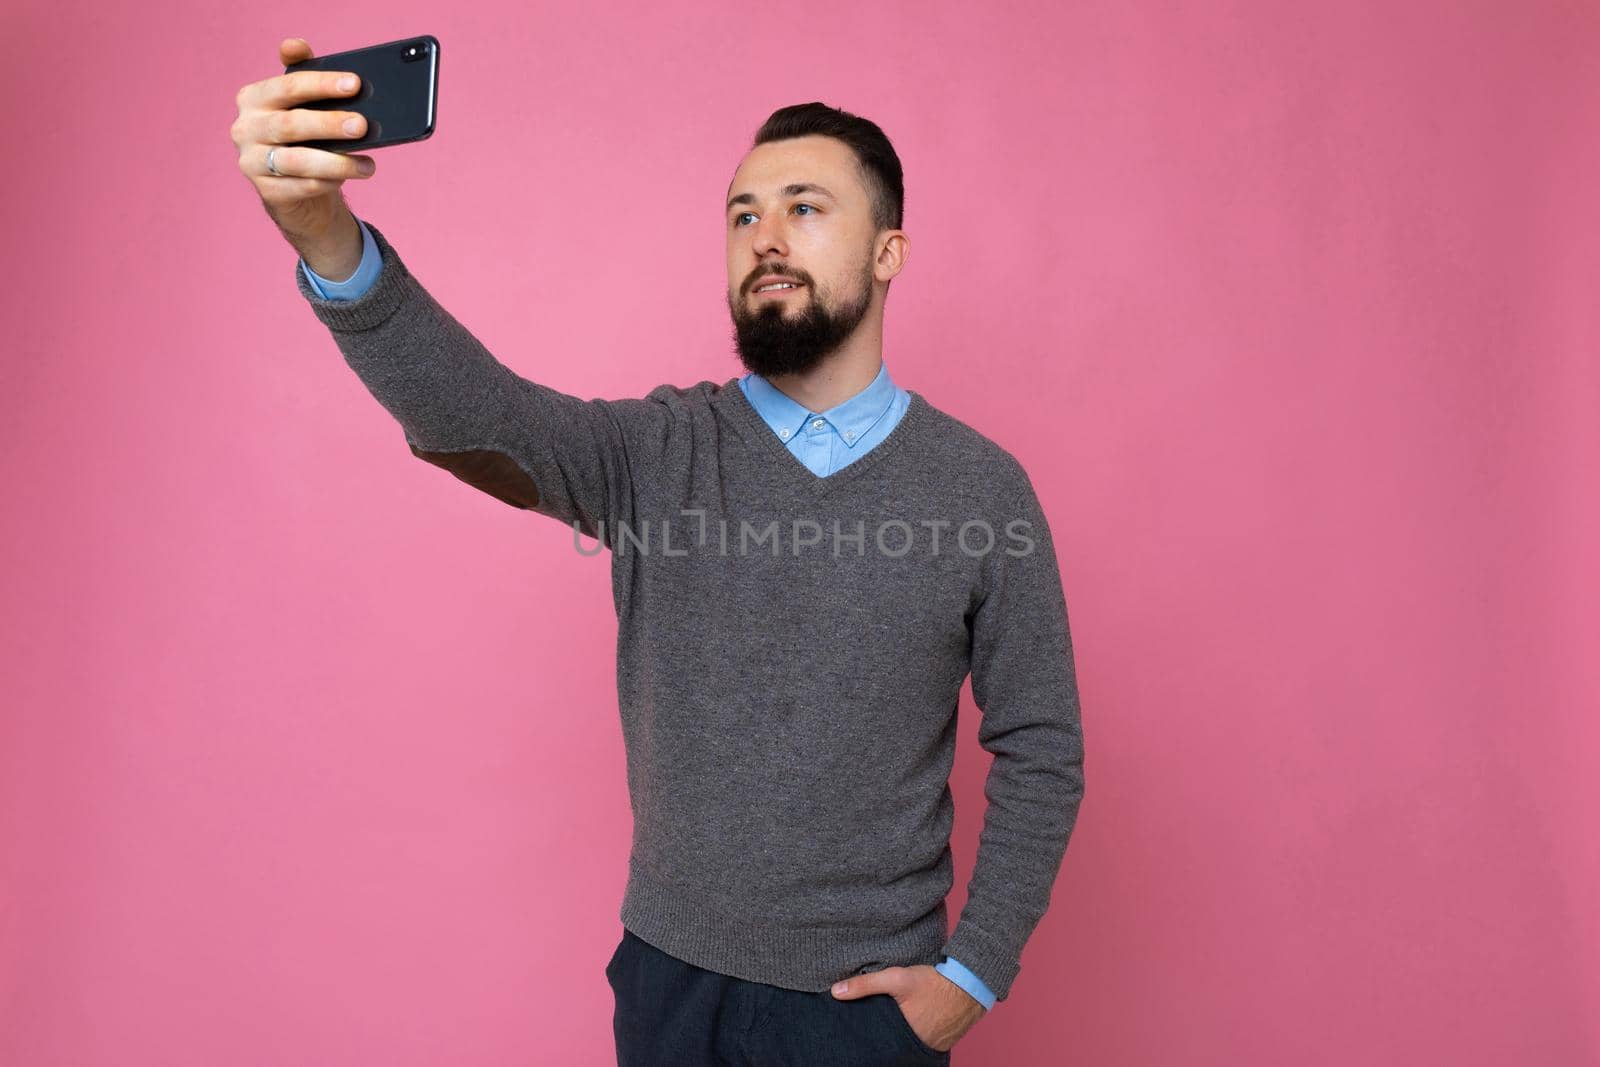 guy on a pink background takes a selfie.